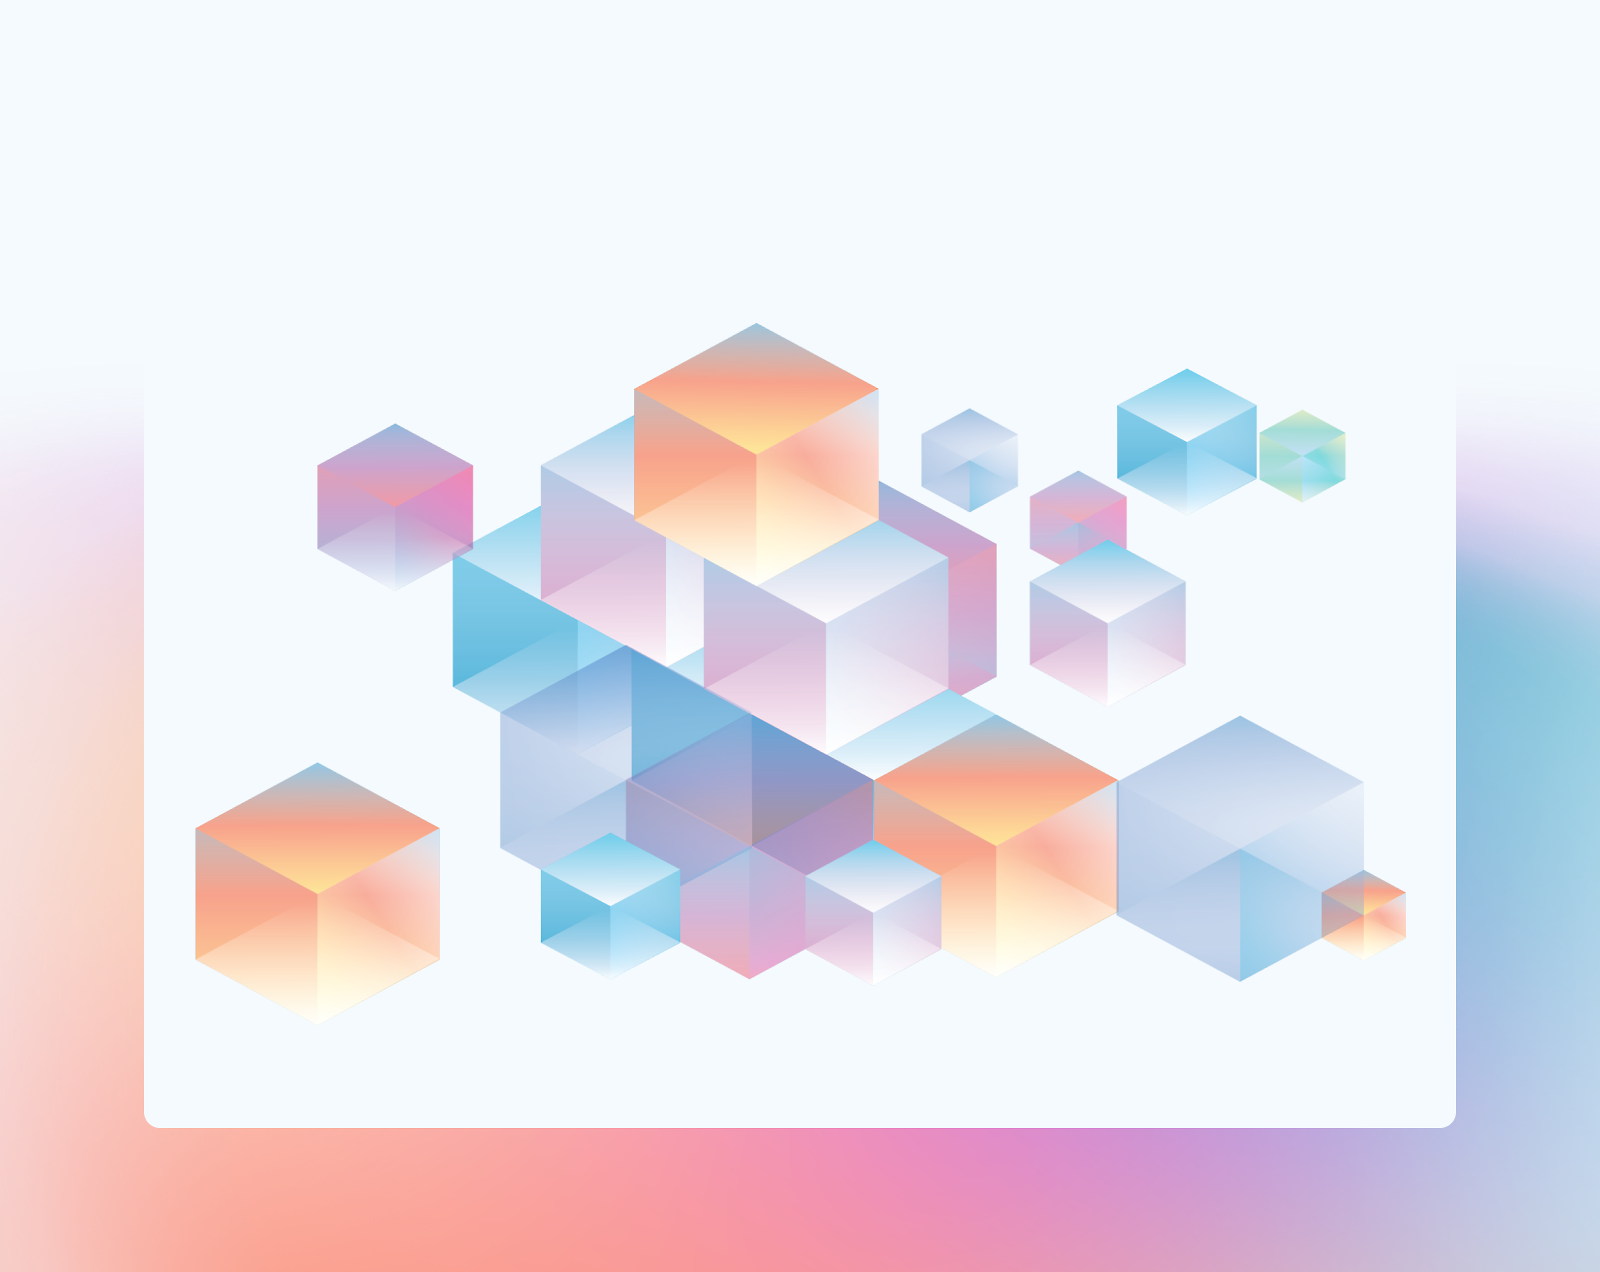 Floating geometric shapes in pastel colors with a soft gradient background.